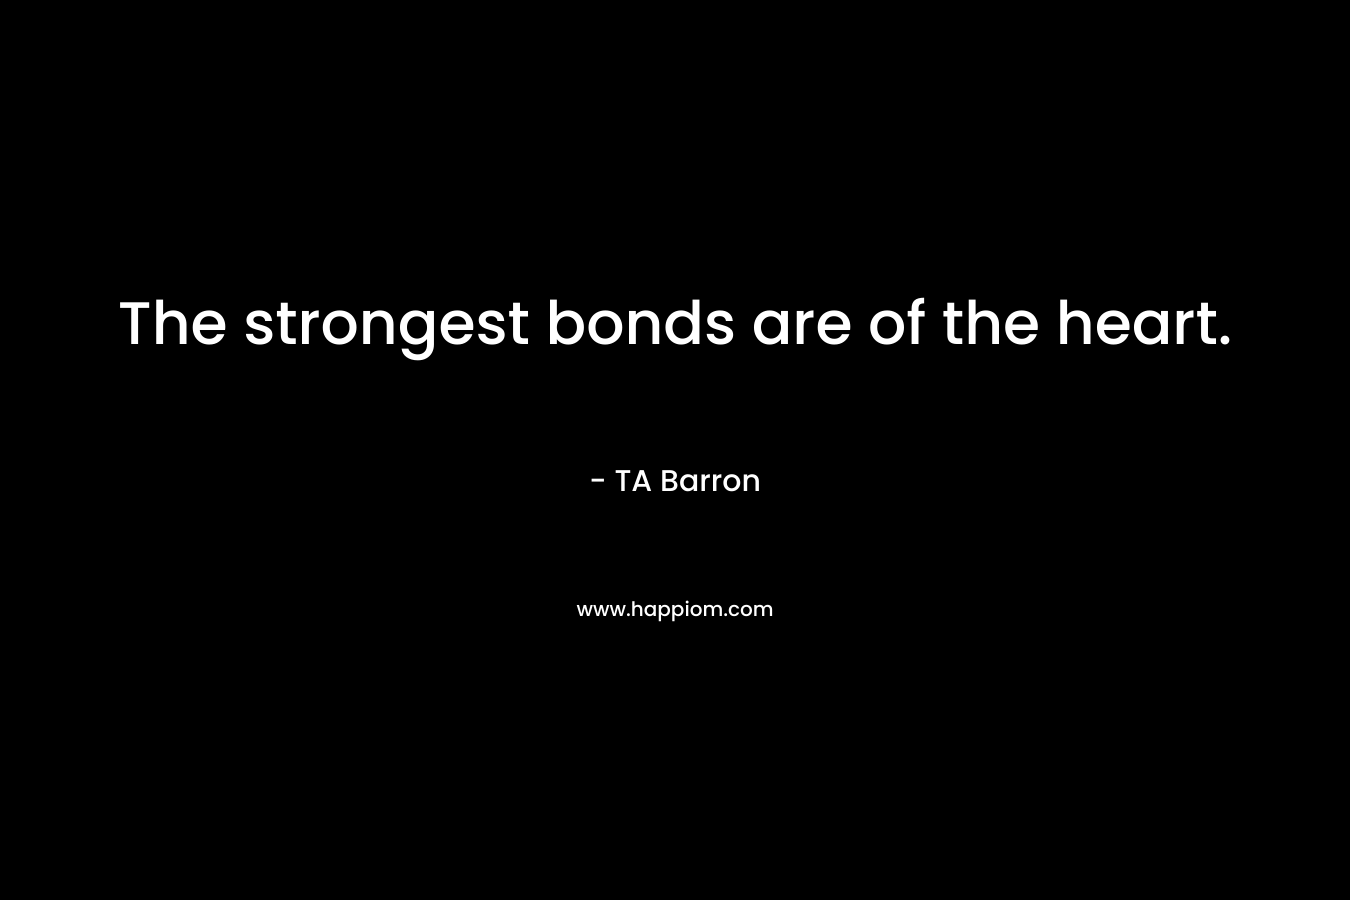 The strongest bonds are of the heart. – TA Barron